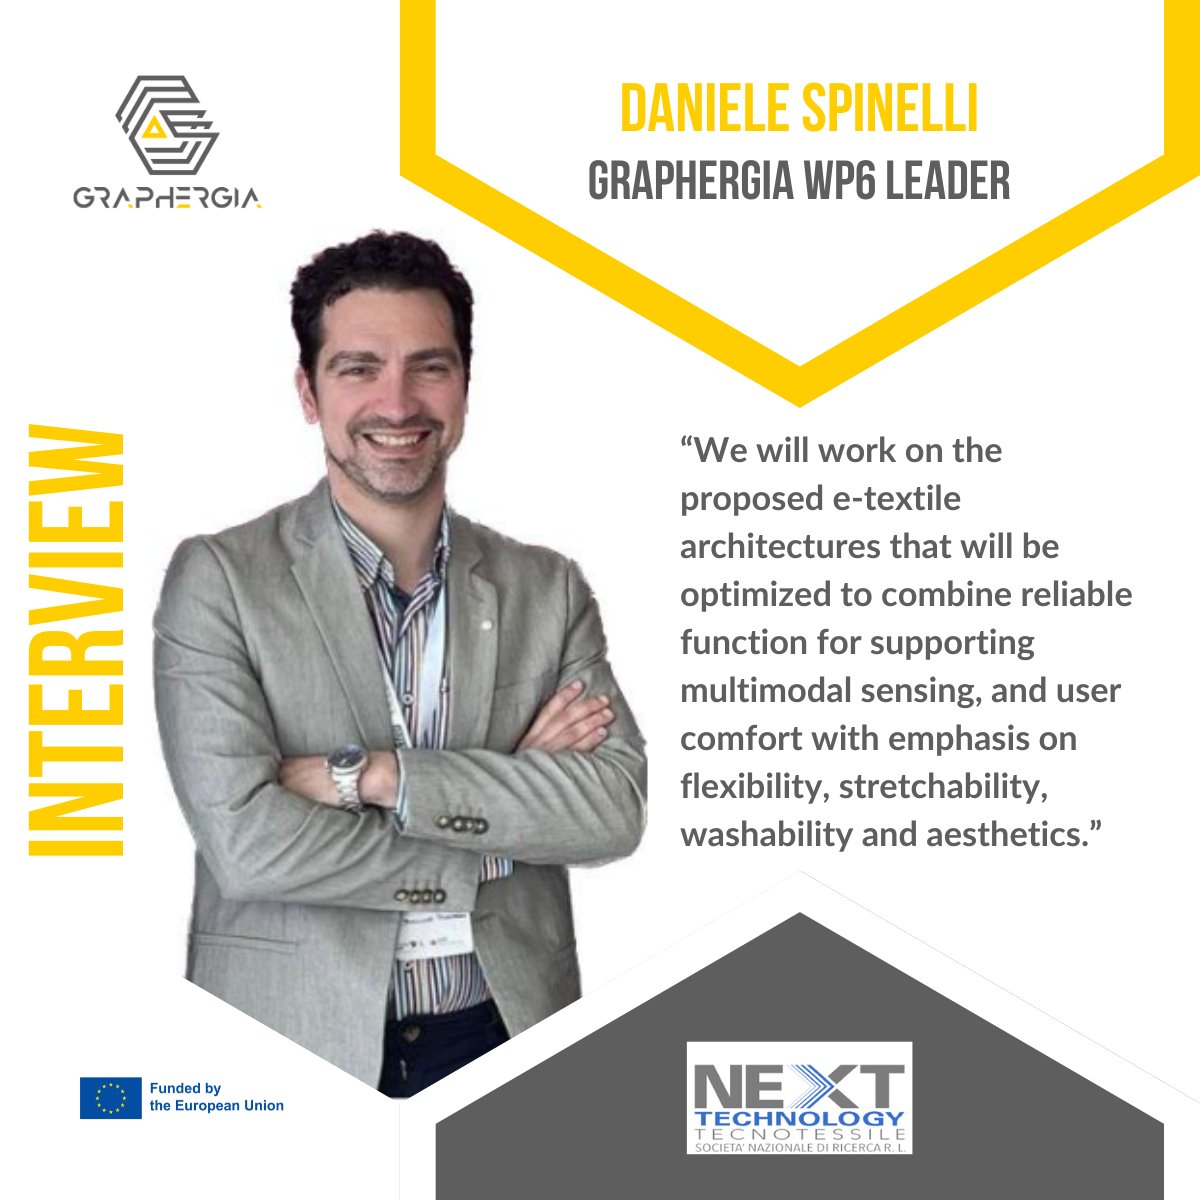 'We joined #GRAPHERGIA because we're involved in innovative solutions for smart & electronic textiles.'

🇮🇹Daniele Spinelli (Next Technology Tecnotessile) is our WP6 ‘Life cycle assessment, sustainability & eco-design approach’ leader

Read his interview➡️ ow.ly/iVcm50RH2v7